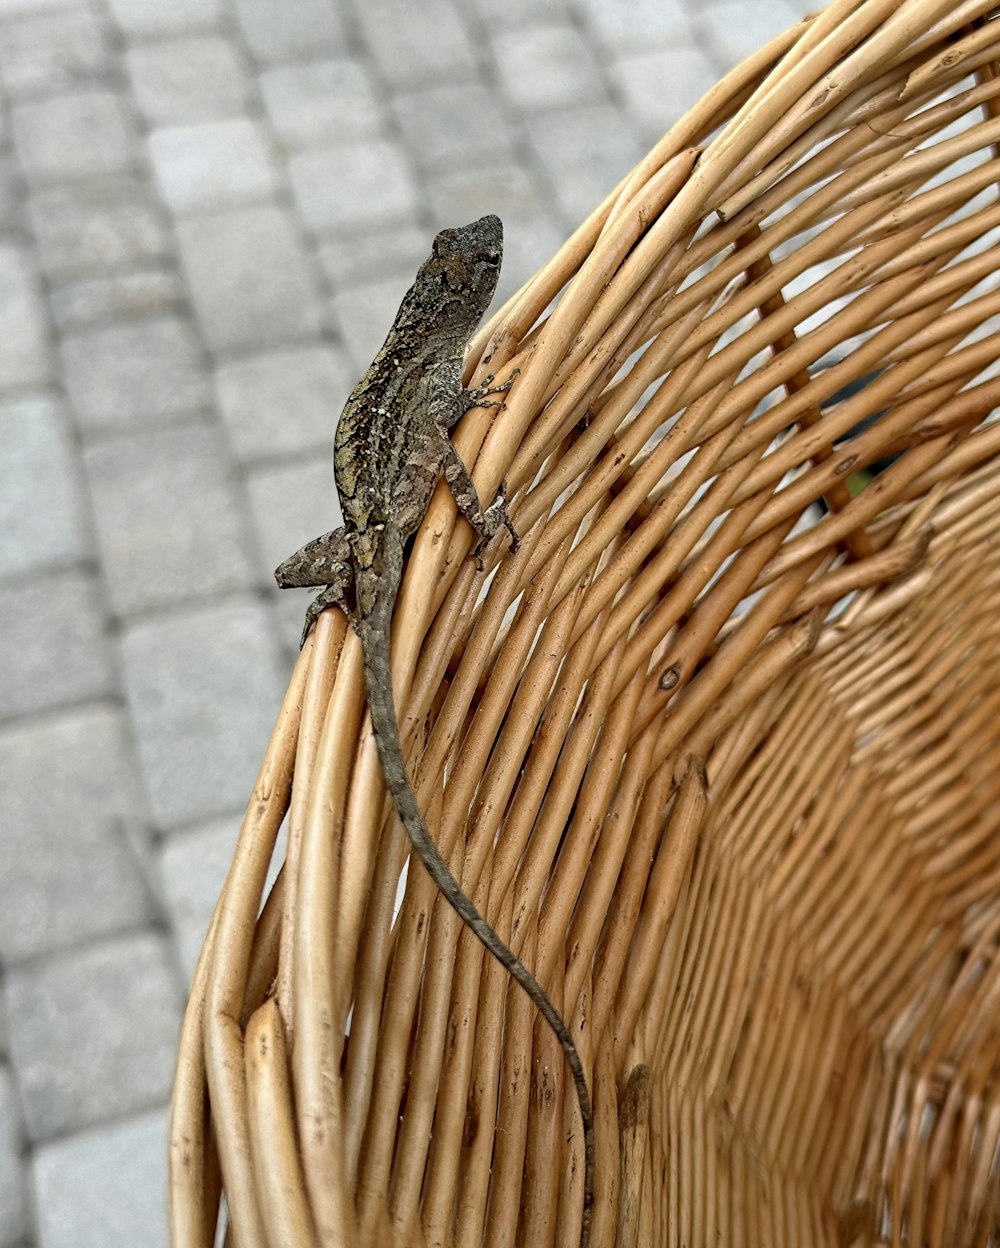 a lizard sitting on top of a wicker chair